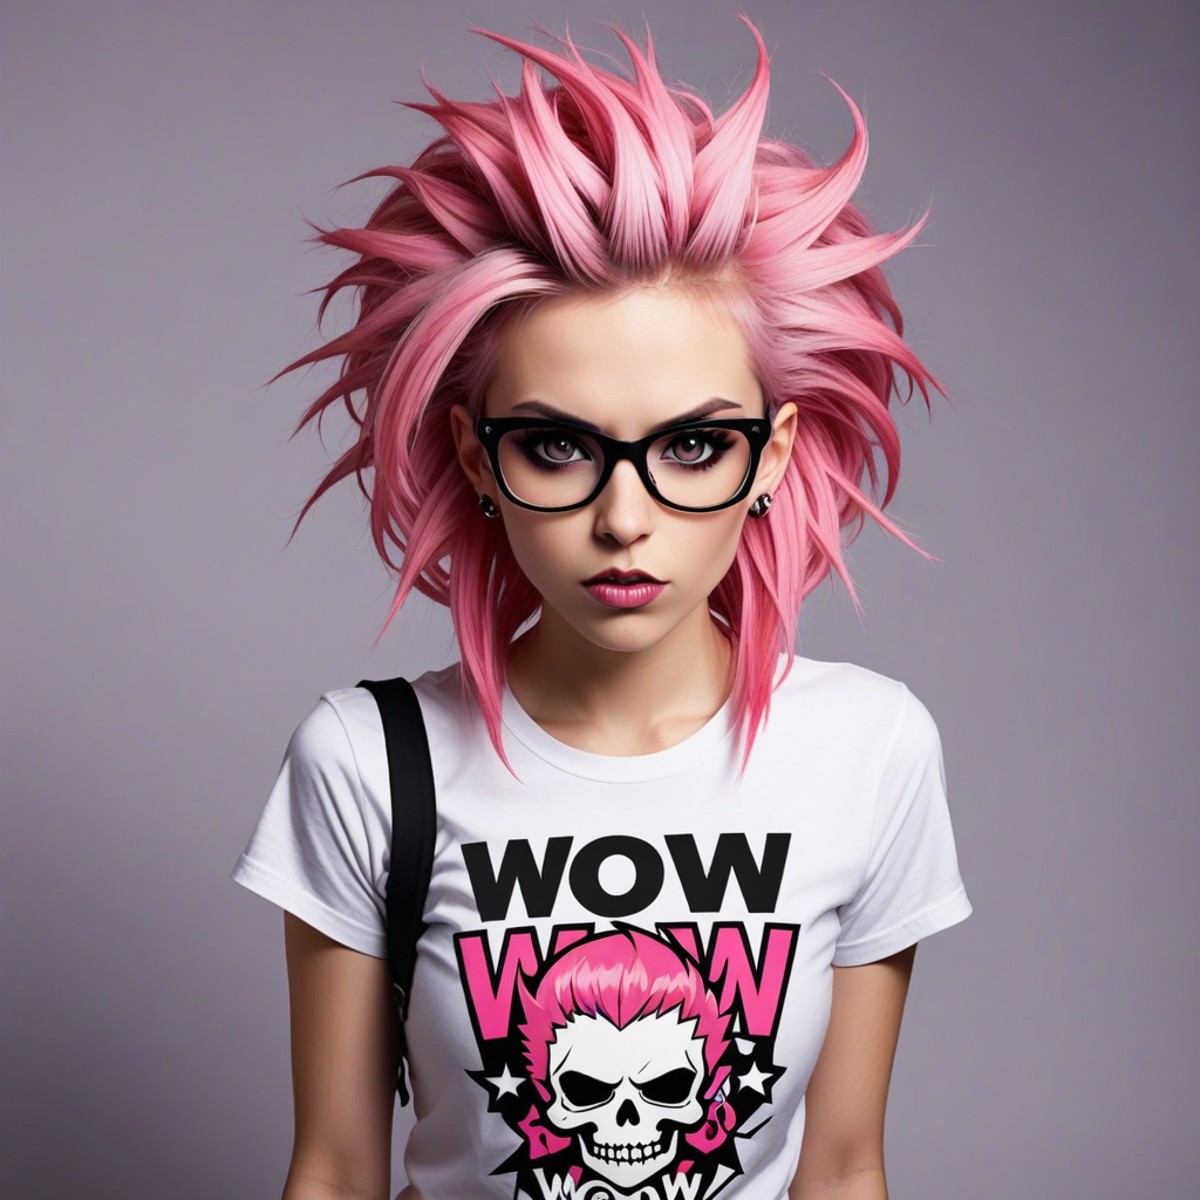 photograph of a beautiful punk woman, "WoW" t-shirt logo with skull design, pink hair, nerdy,